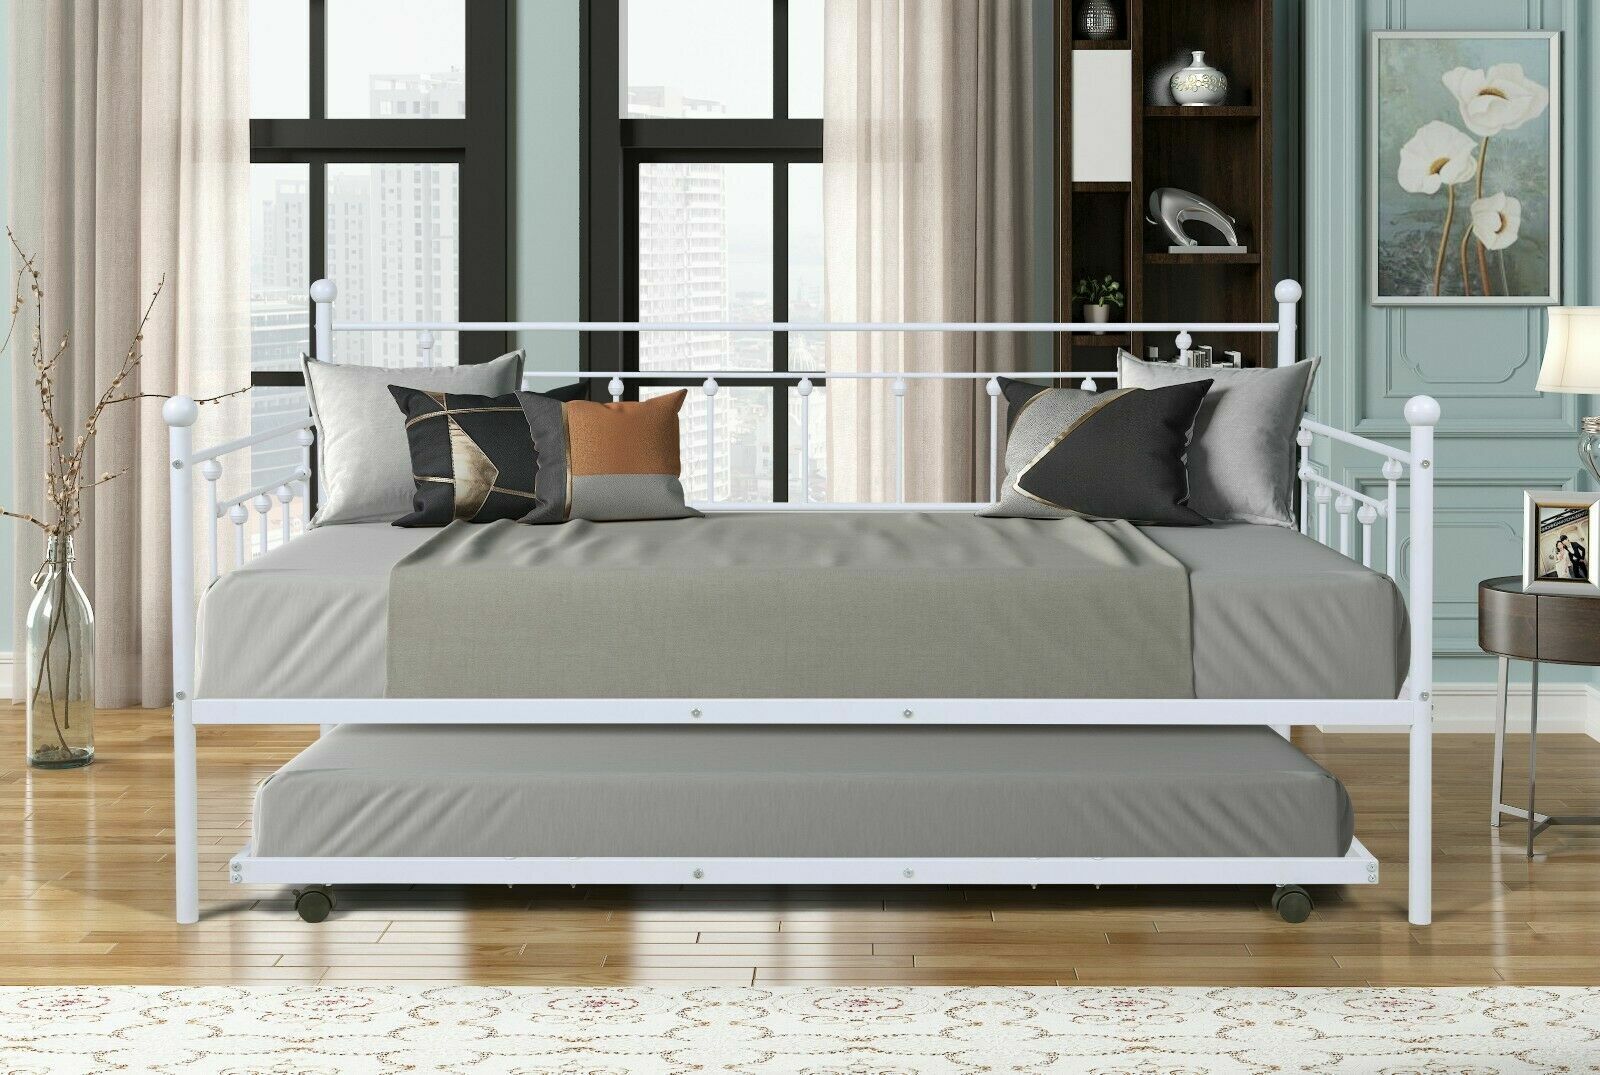 Metal Frame Daybed with Trundle Bedroom Furniture Space Saving For Kids Adults Fetines Does Not Apply - фотография #2